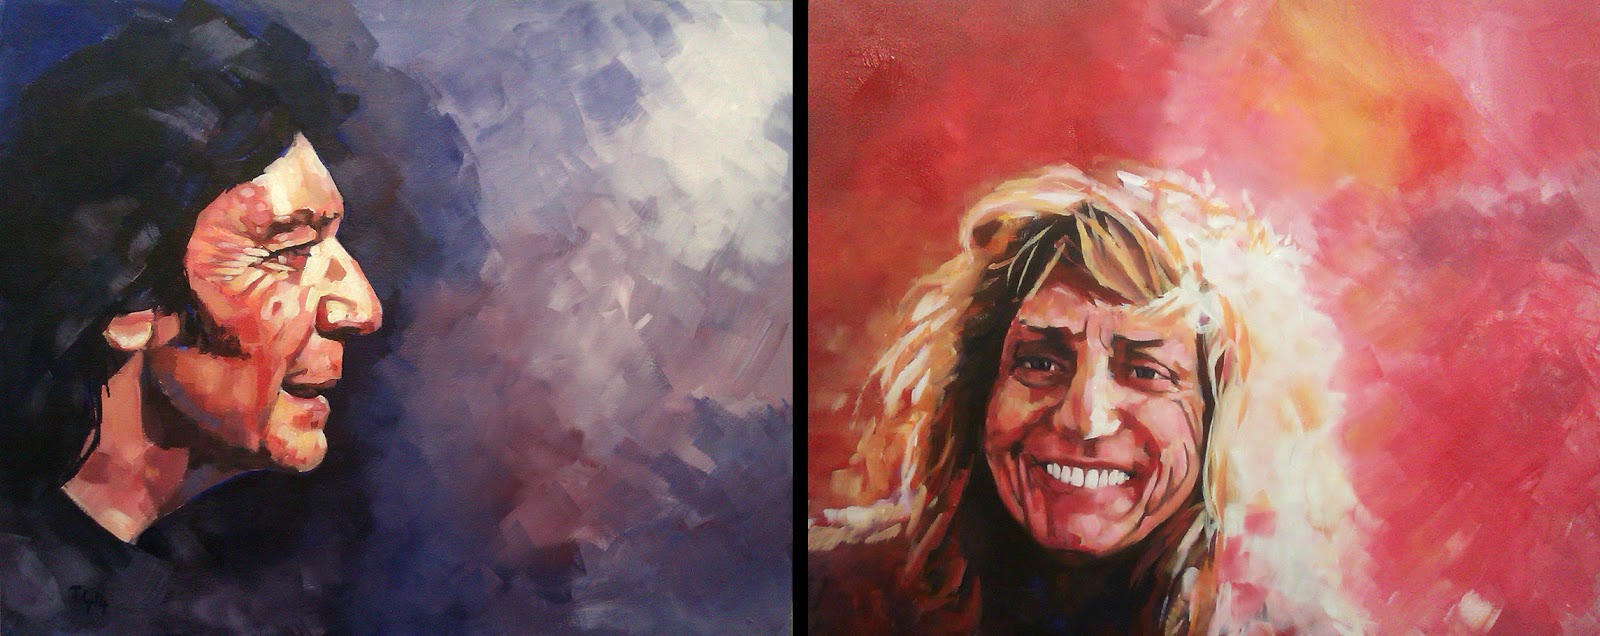 Steve Hackett and David Coverdale painted by Anthony Greentree